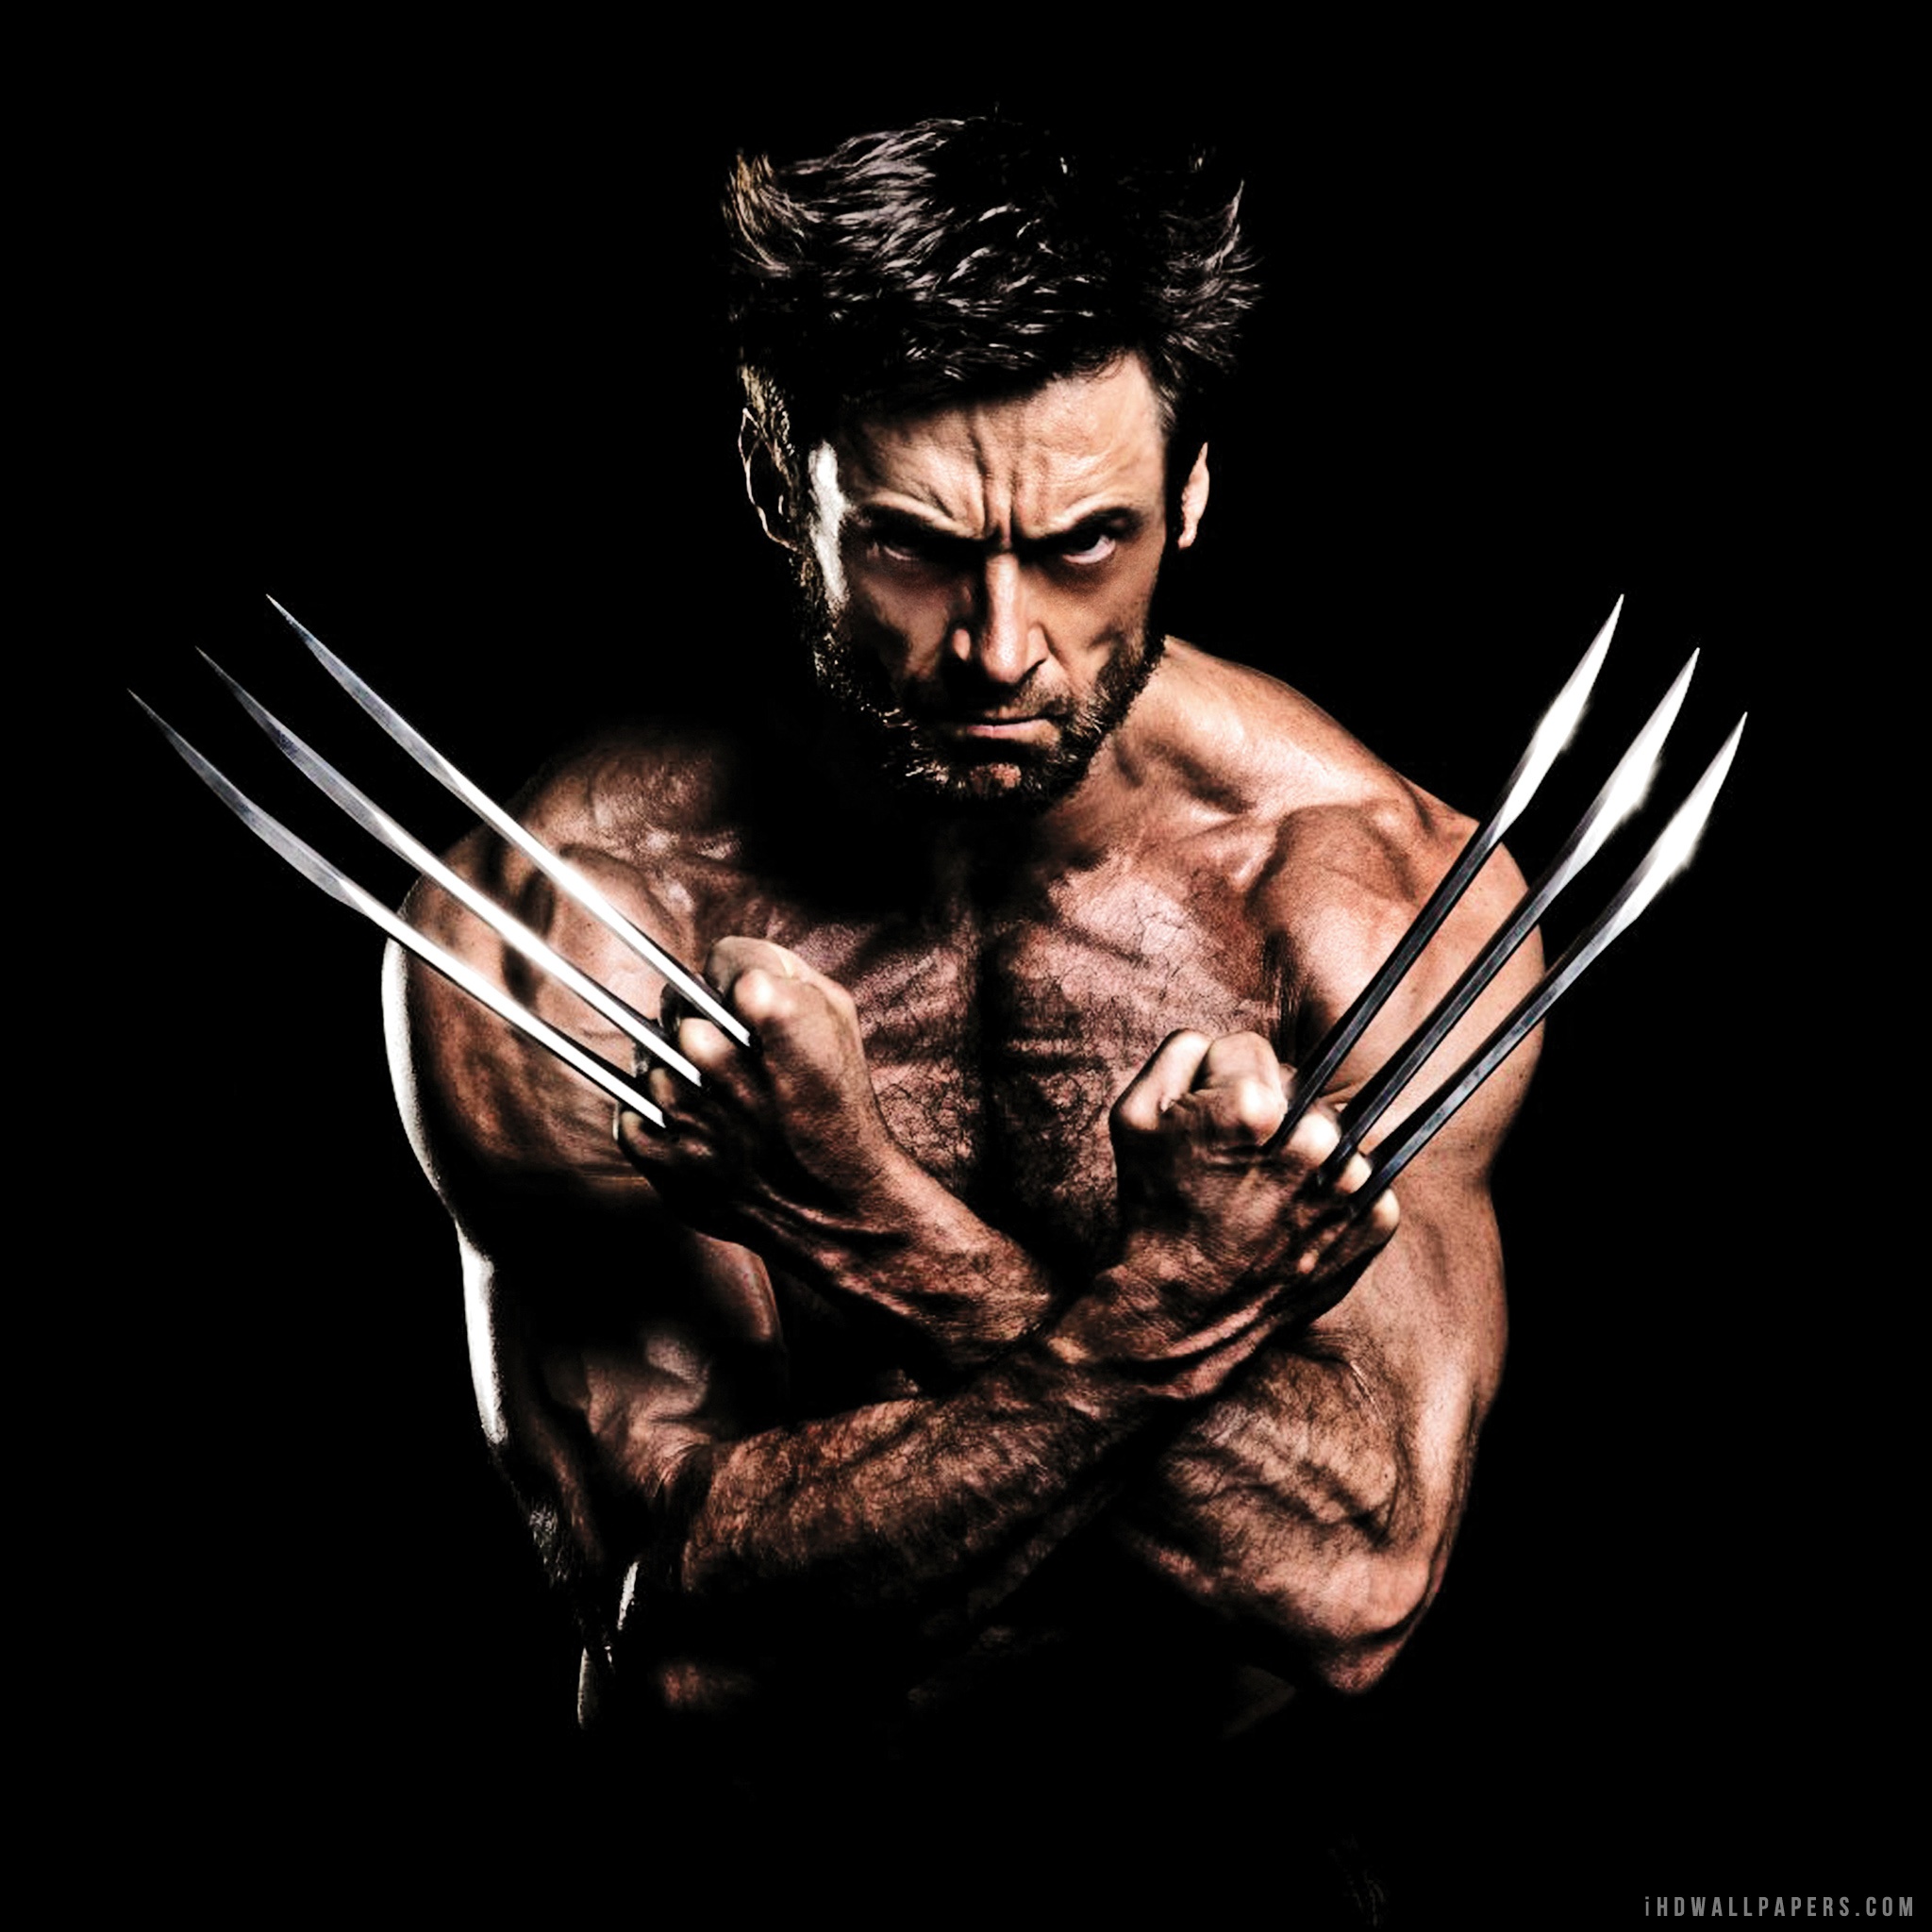 Free download Hugh Jackman as The Wolverine HD Wallpaper iHD Wallpapers ...